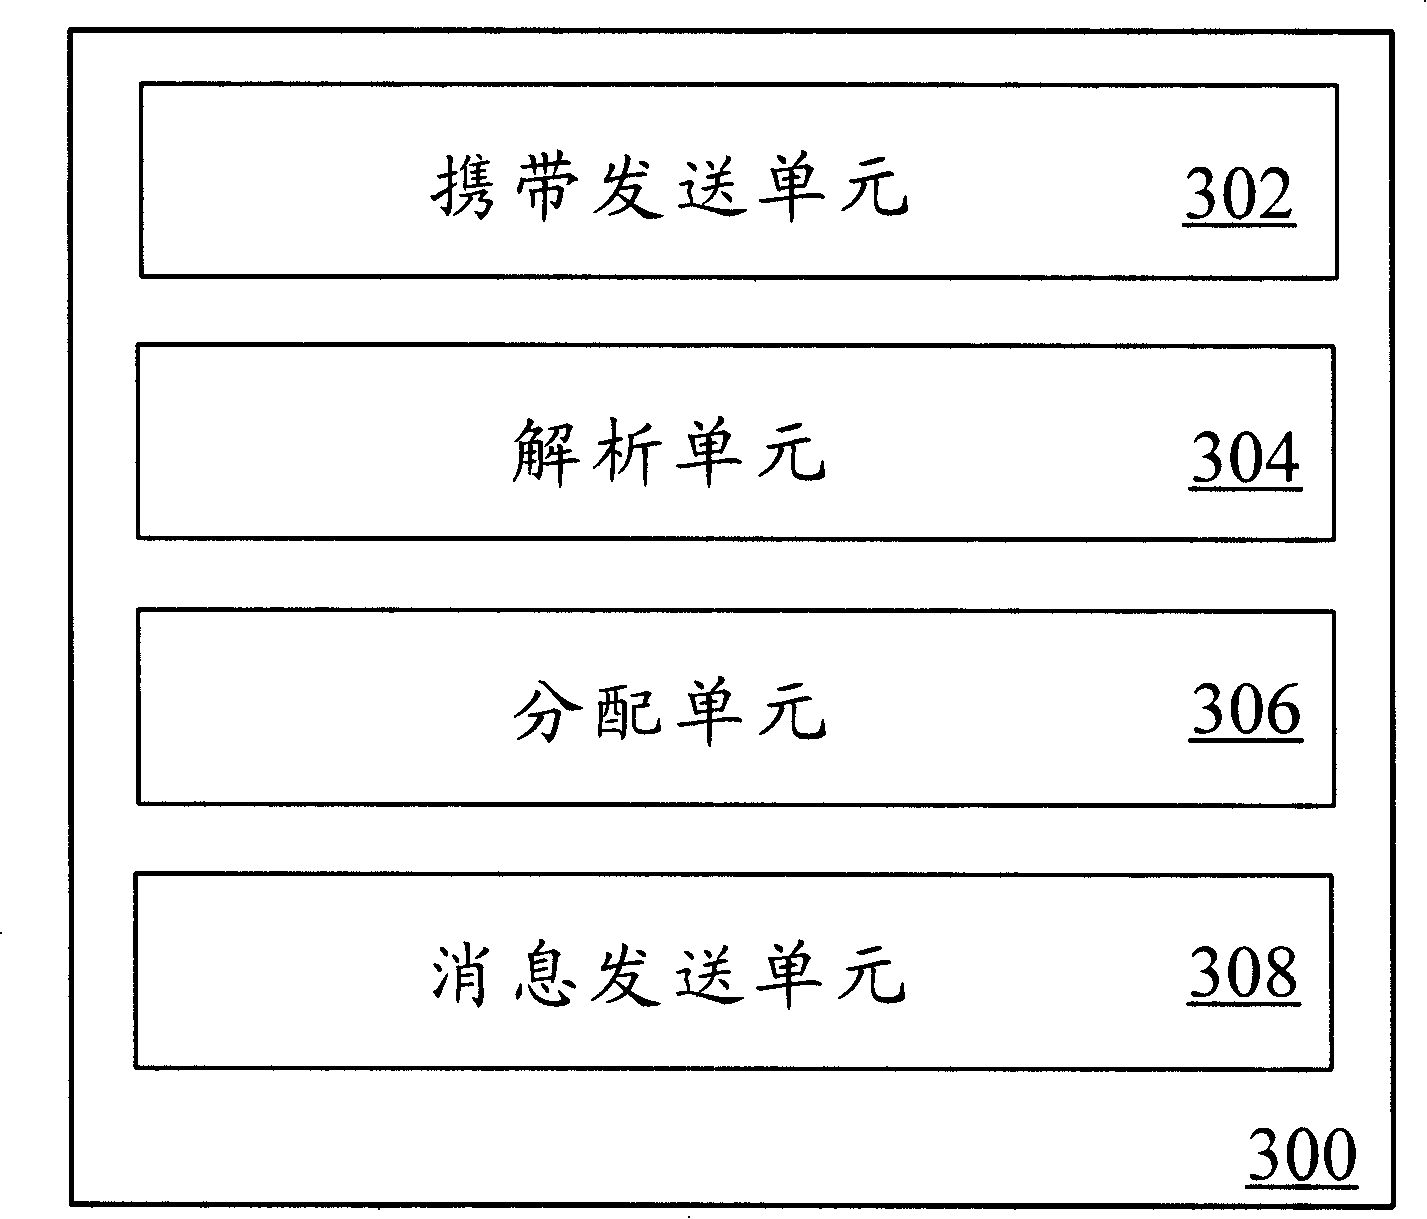 Label distribution device used for informing upper course to distribute label in label distribution protocol